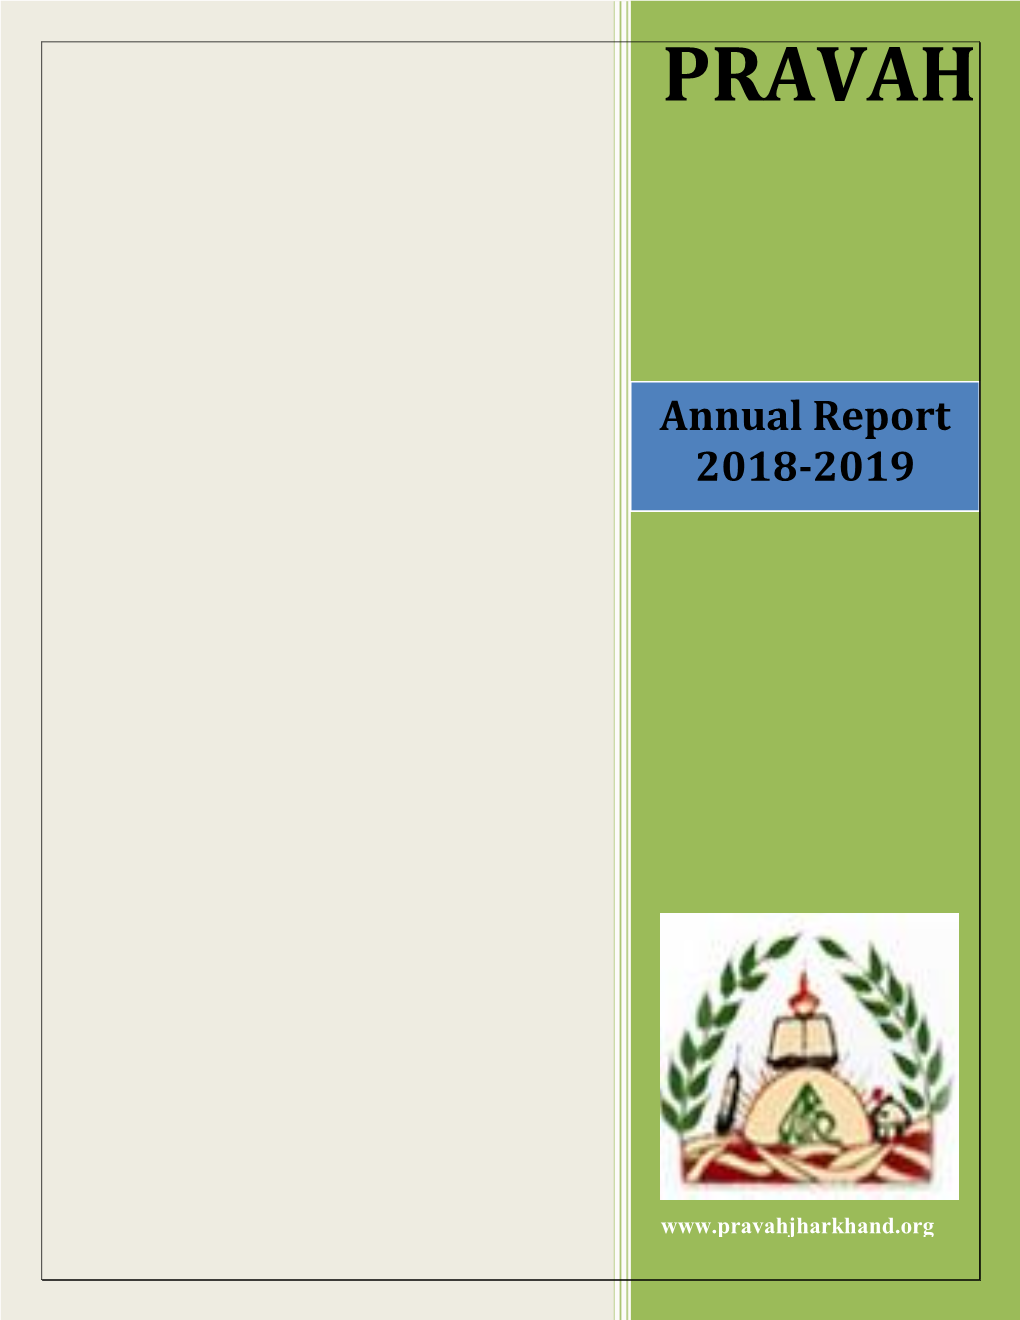 PRAVAH Path Finding for Better Living Annual Report 2018-19 All Articles